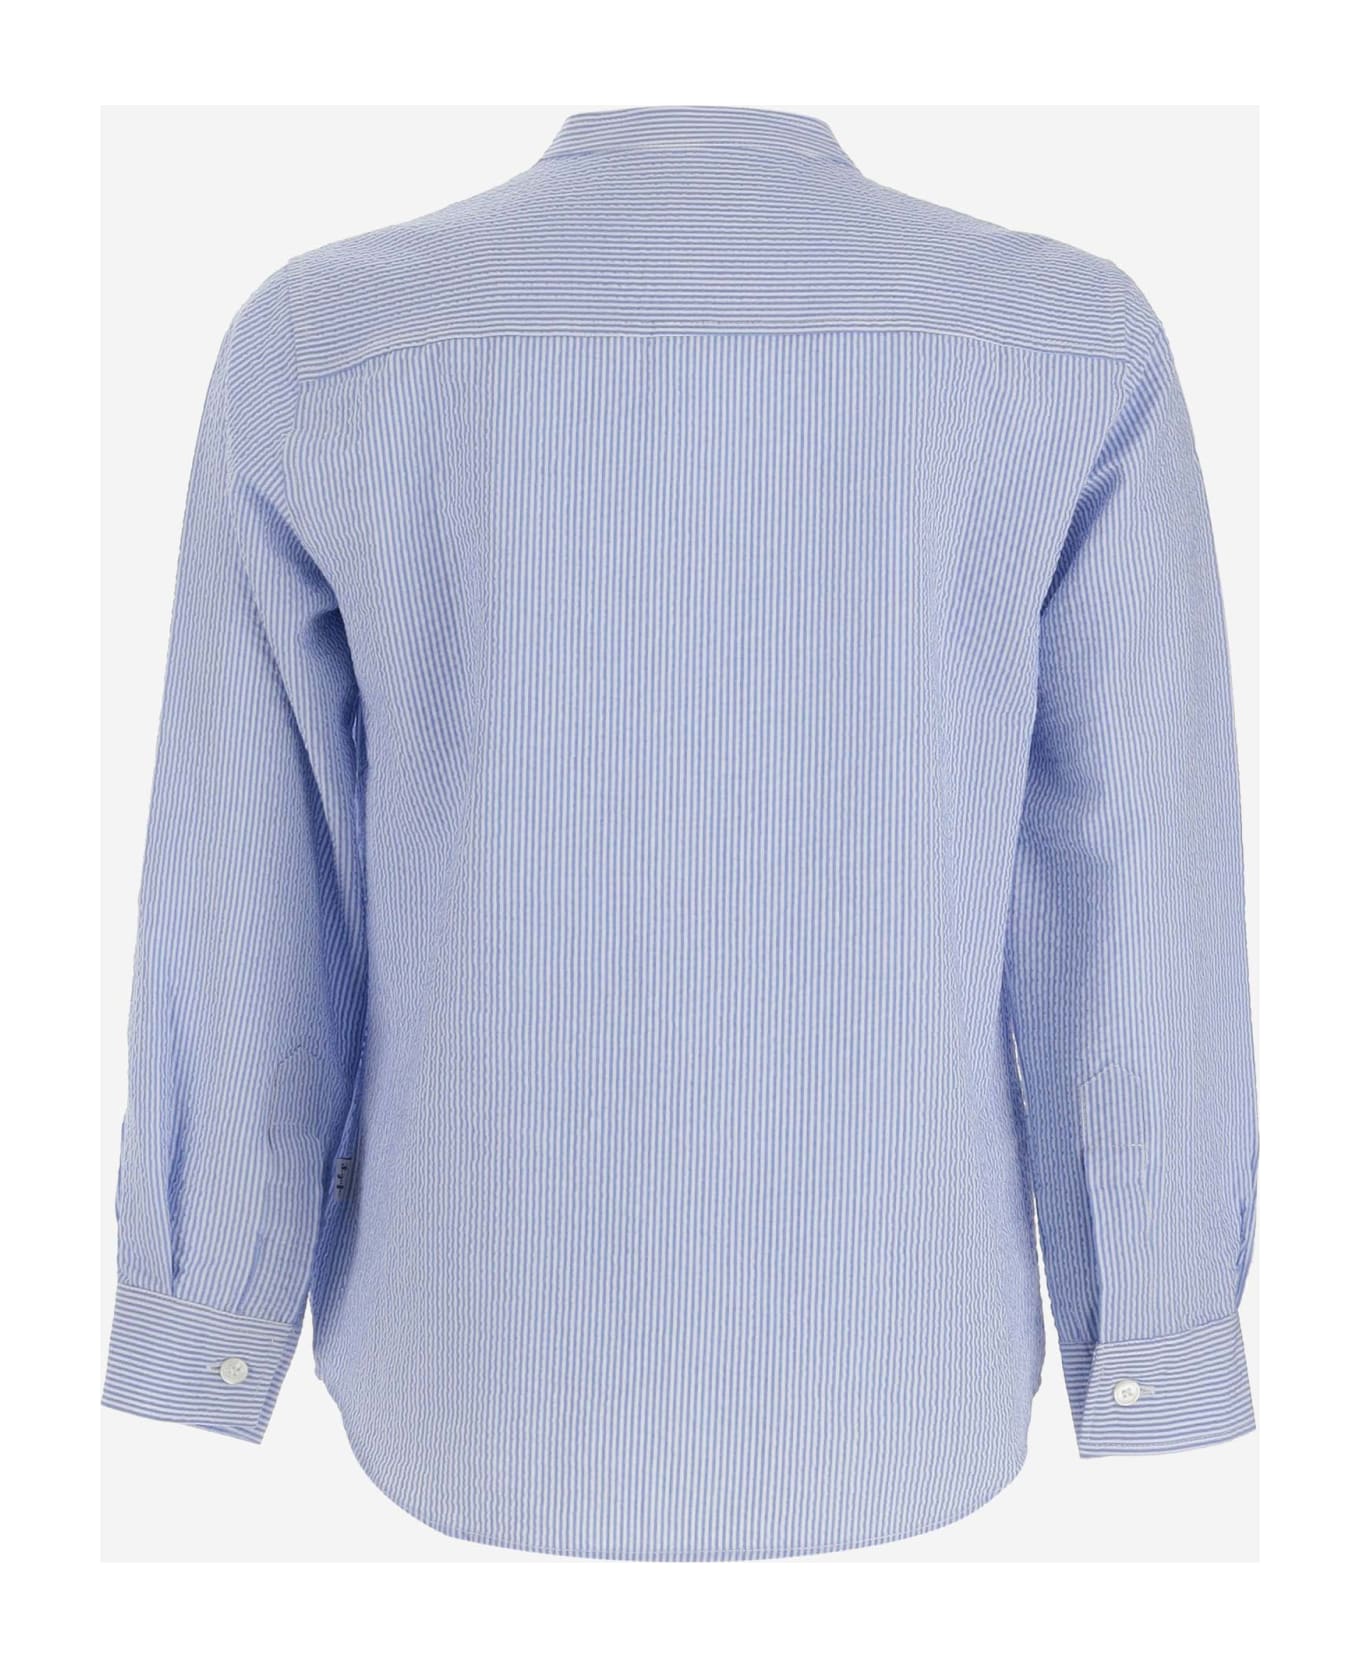 Il Gufo Stretch Cotton Shirt With Striped Pattern - Clear Blue シャツ